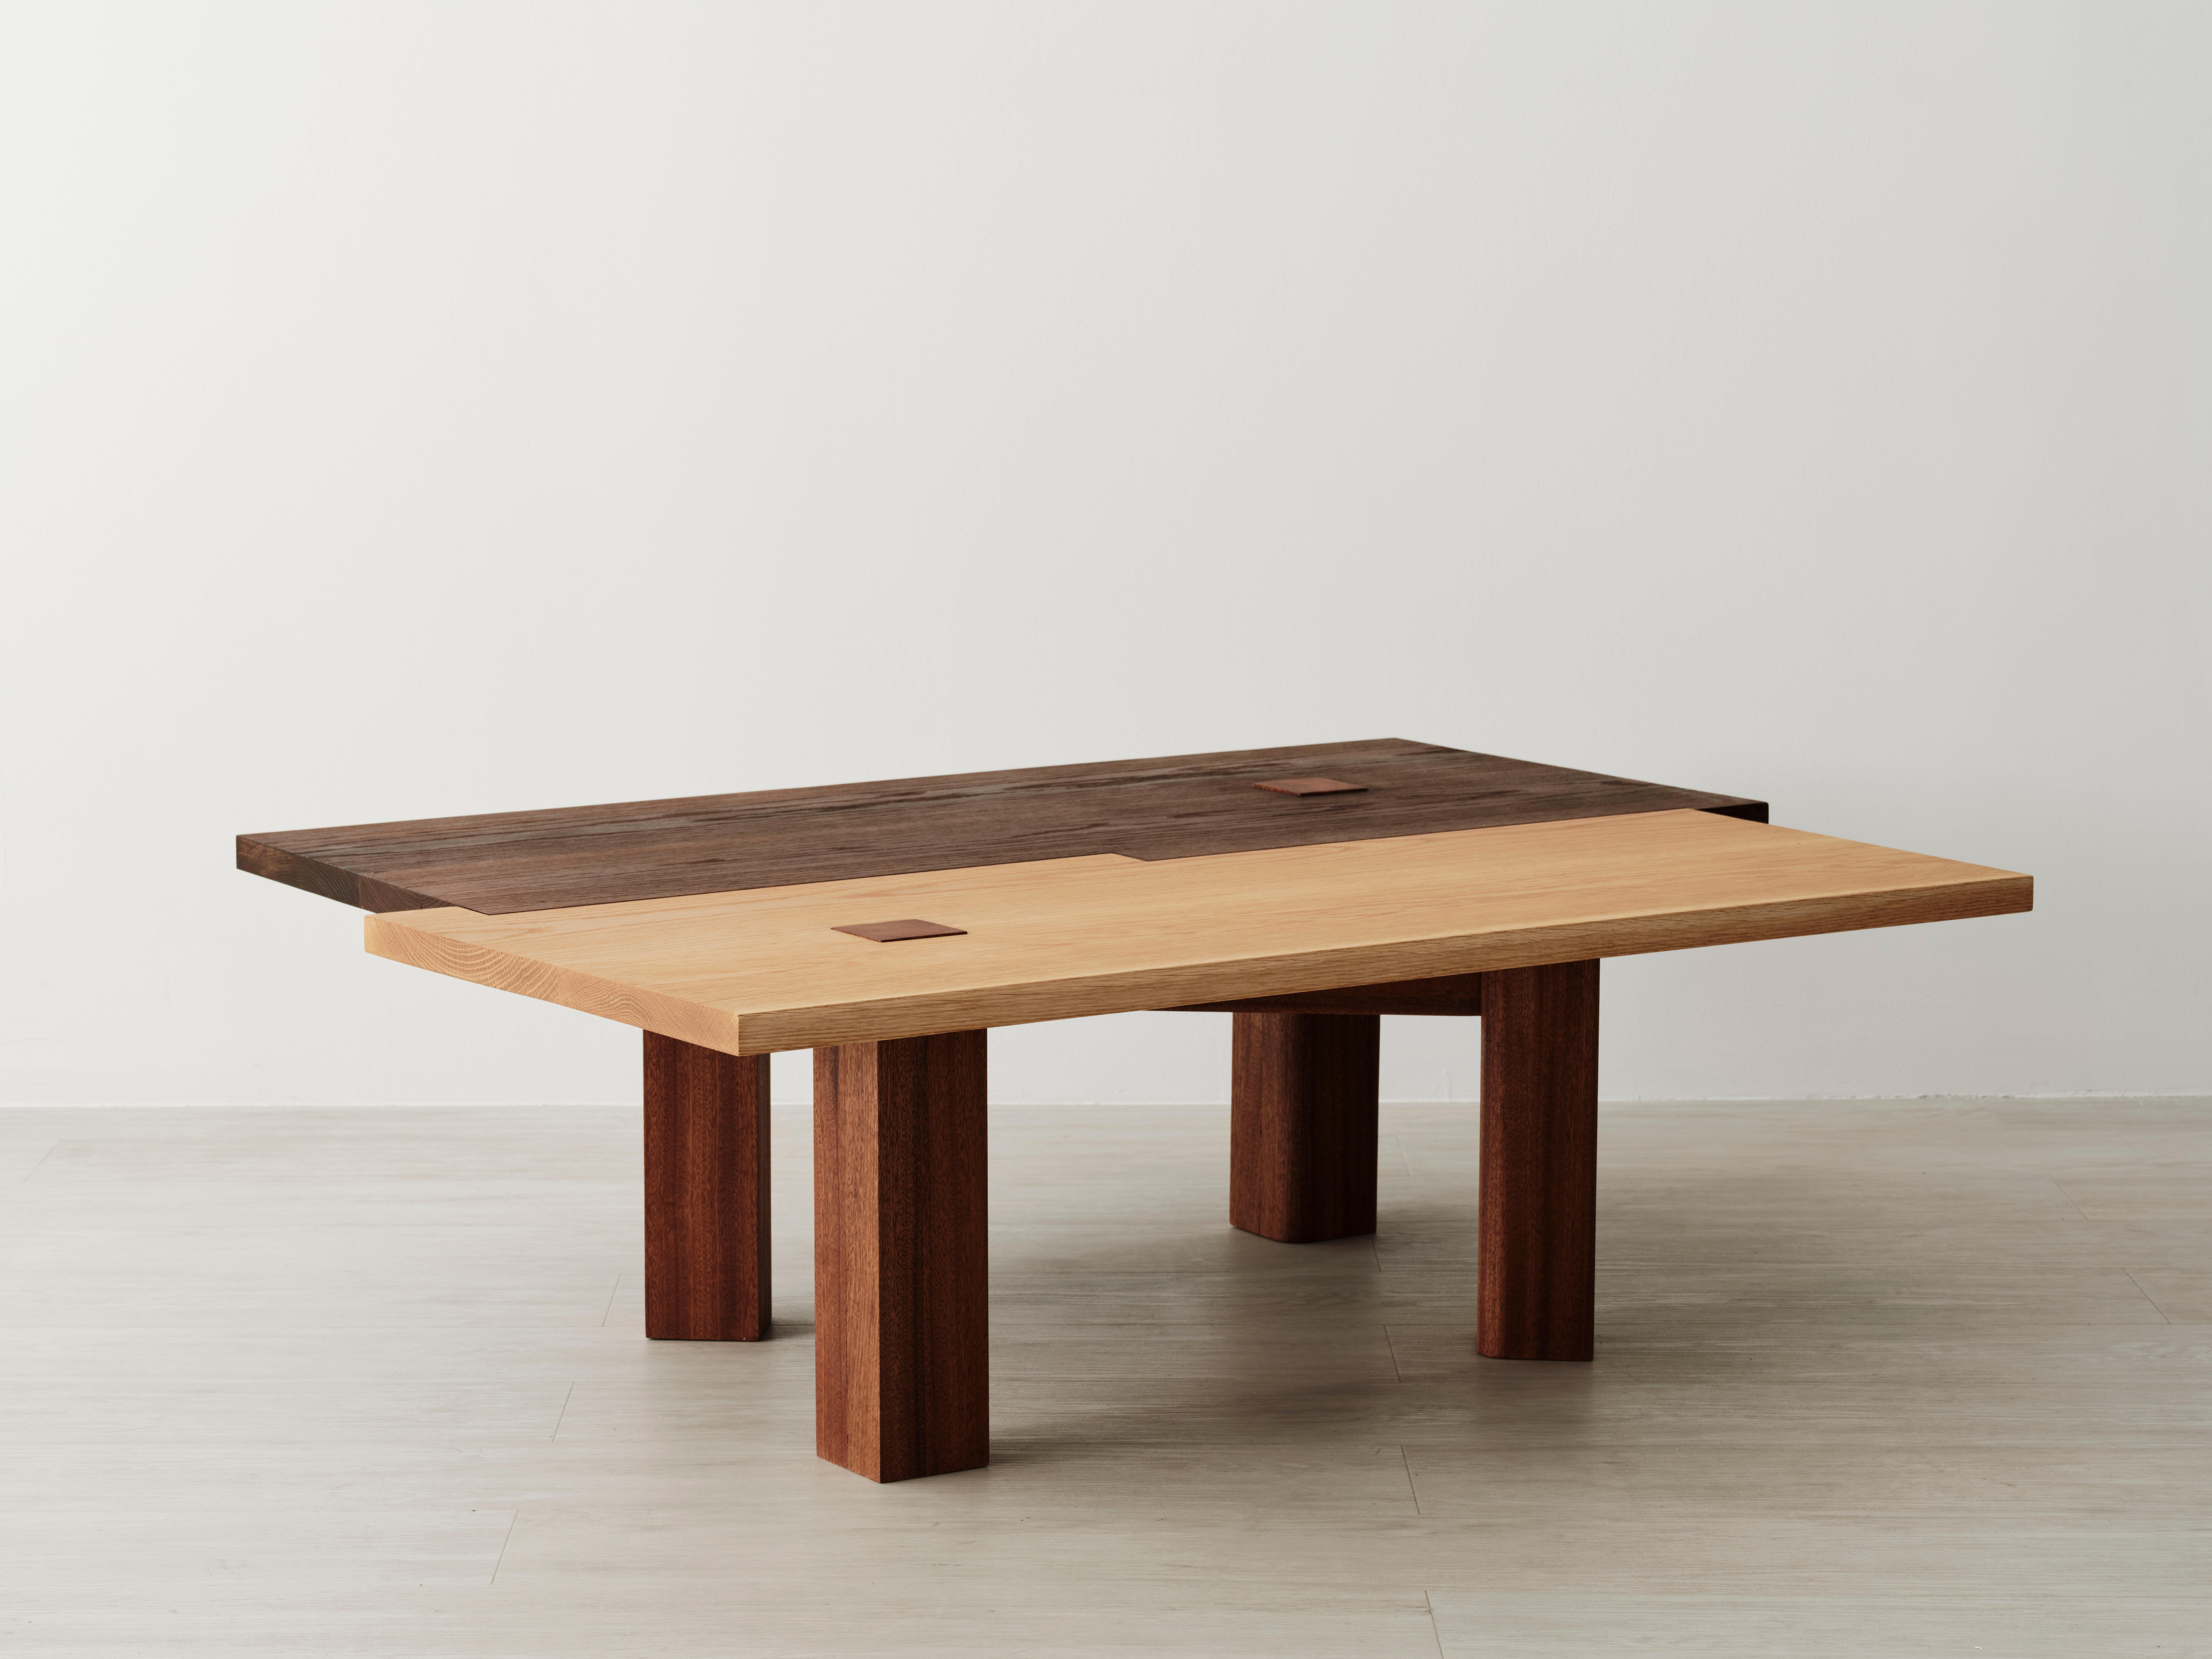 This tri-toned coffee table is made from interlocking pieces of white and fumed red oak, inset with Sapele mahogany legs. Wax/oil finish. Crafted by hand in Gregory Beson's Brooklyn atelier.

